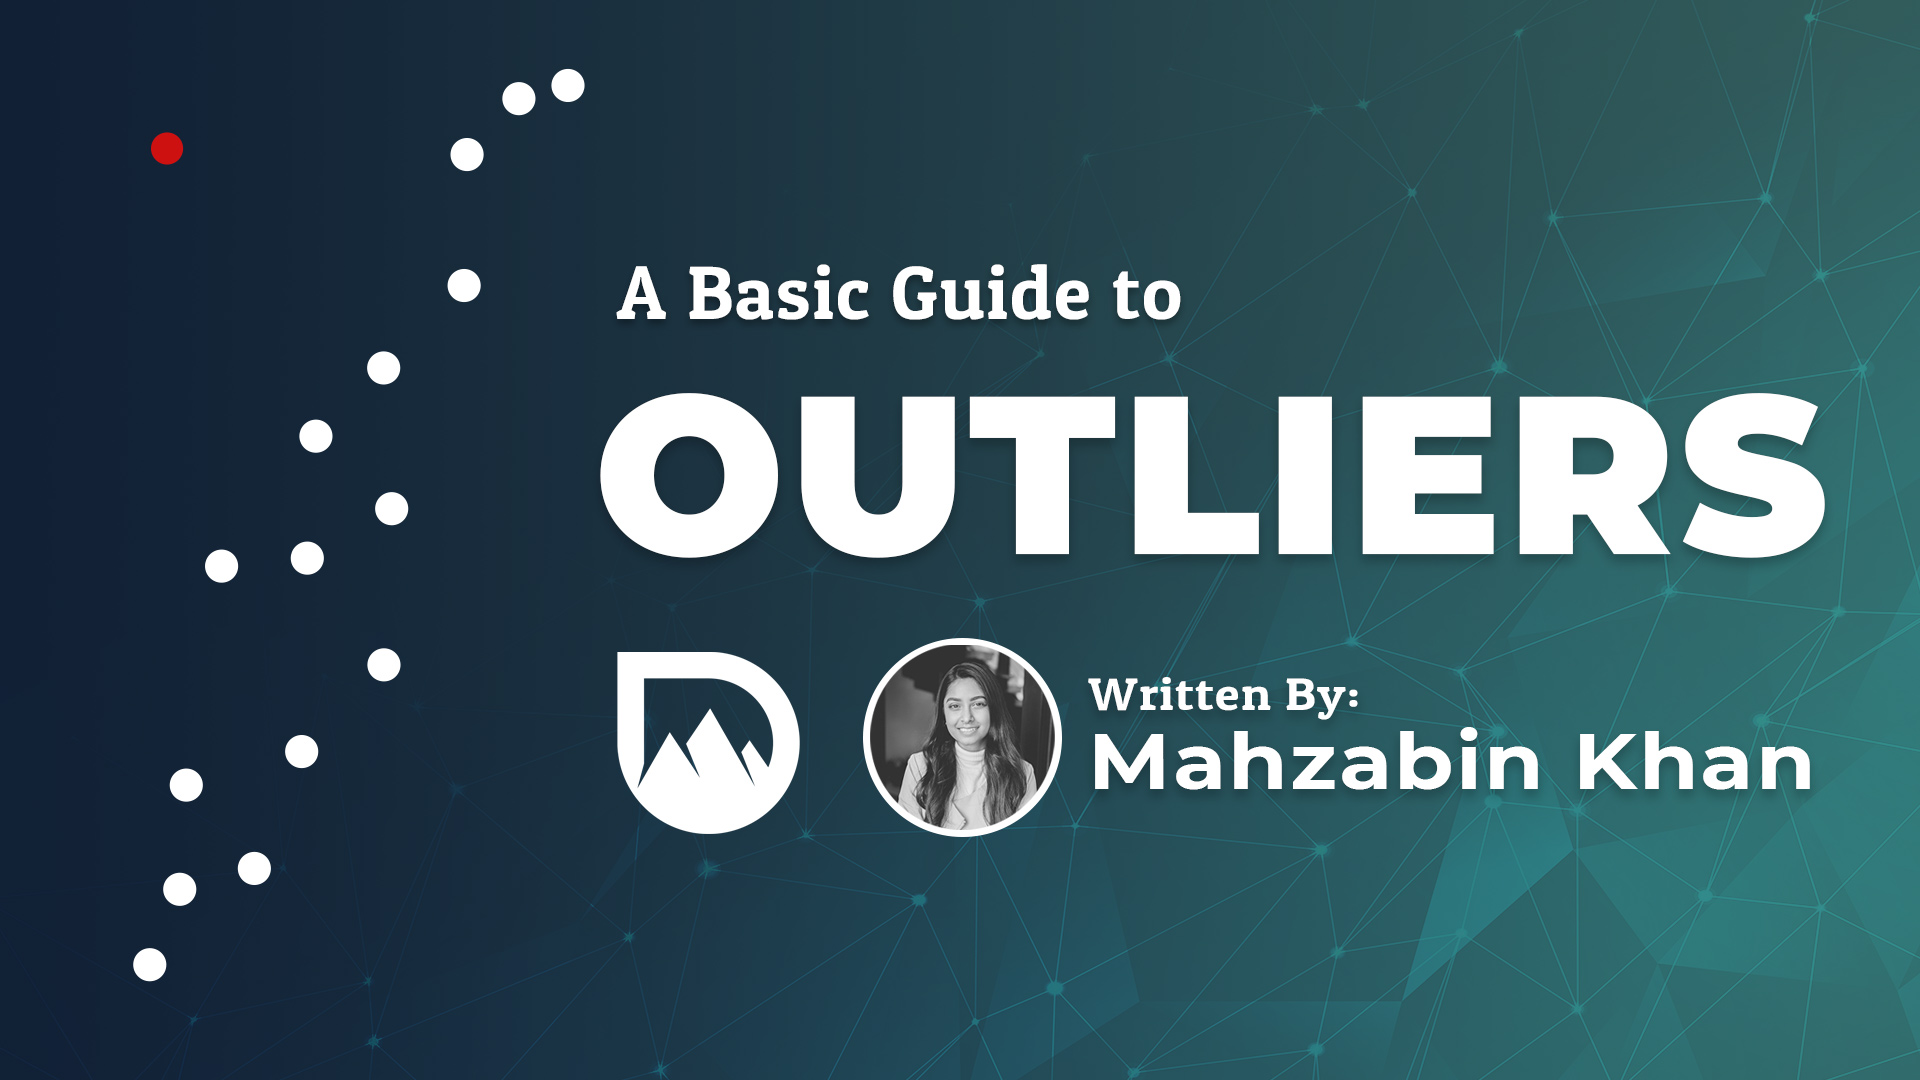 A Basic Guide to Outliers